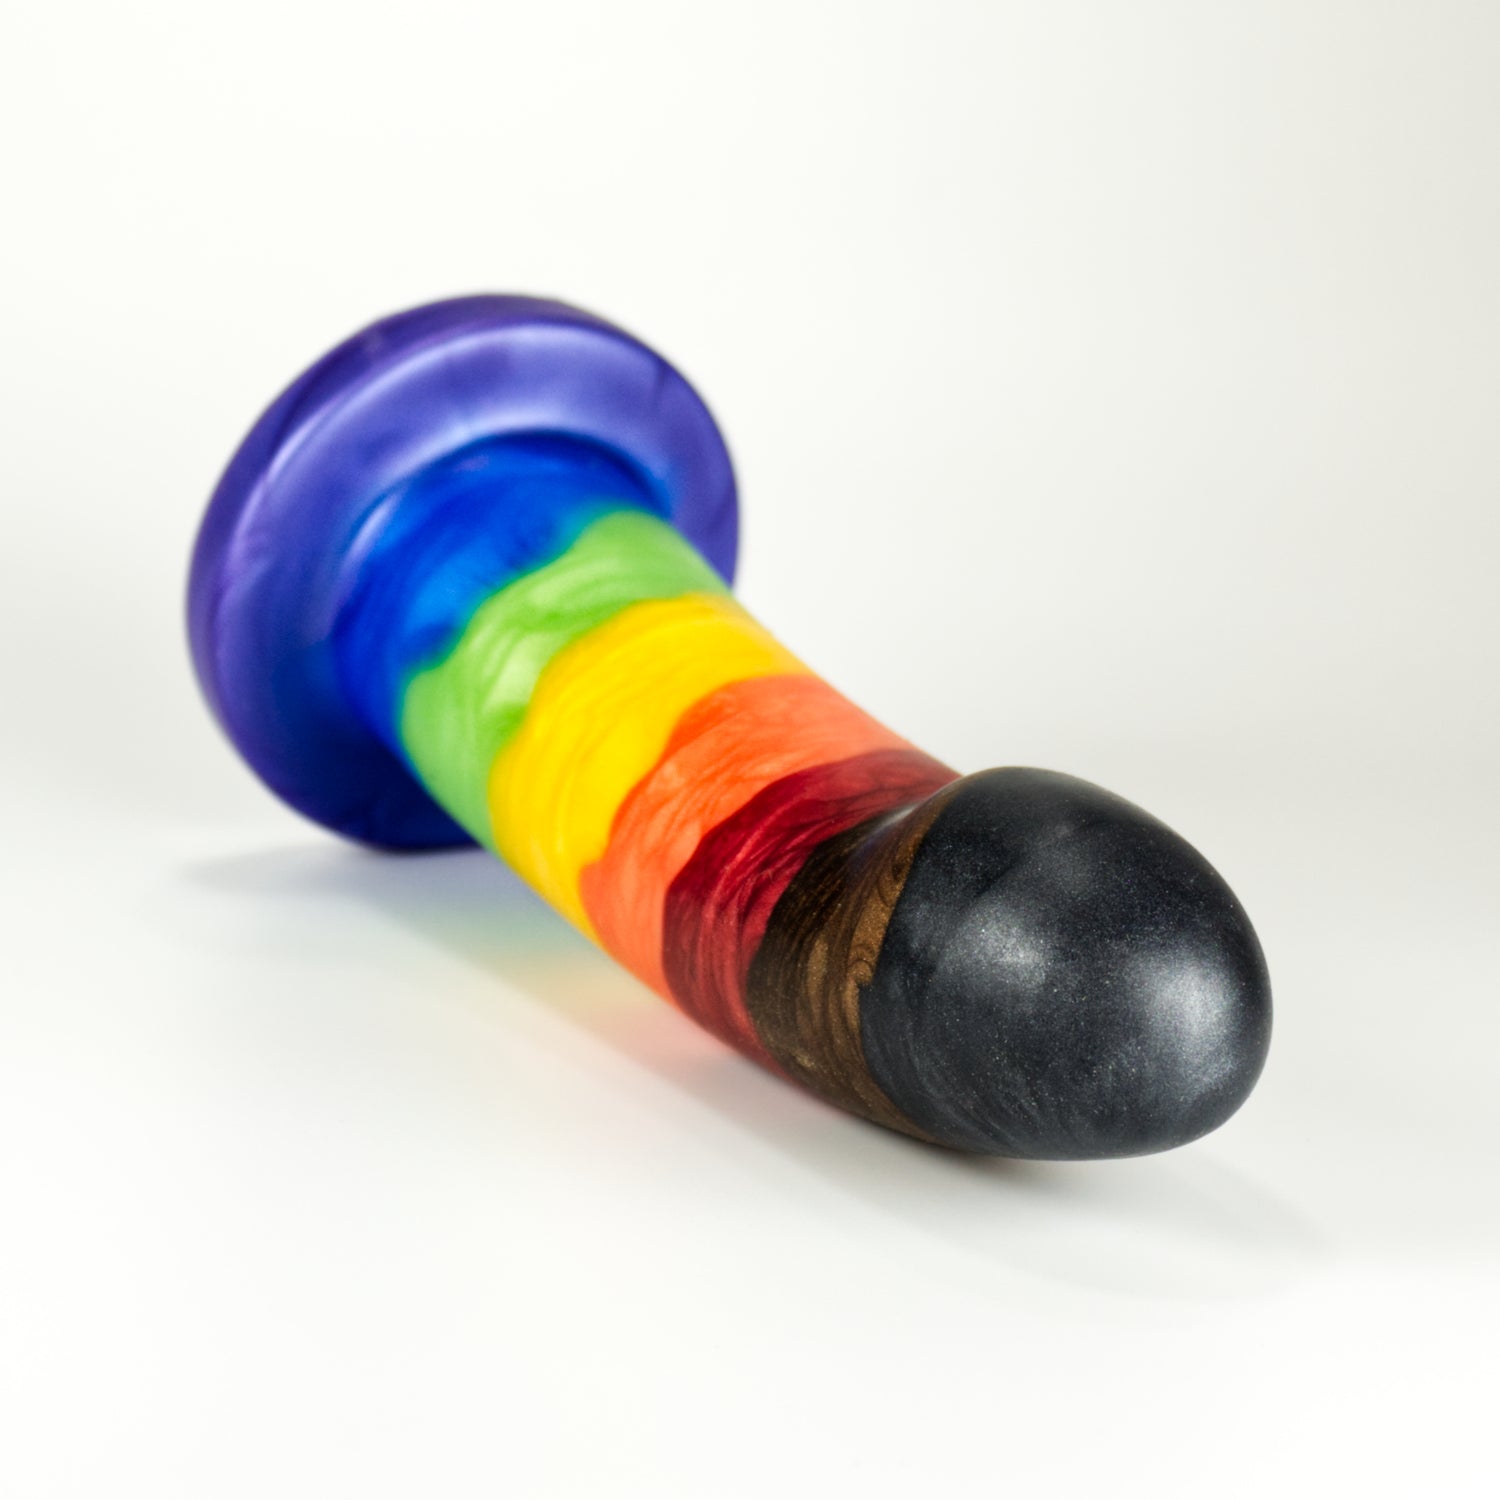 A Sidekick dildo lying down facing the viewer, striped in Intersectional Pride rainbow colors (Rainbow plus black and brown)